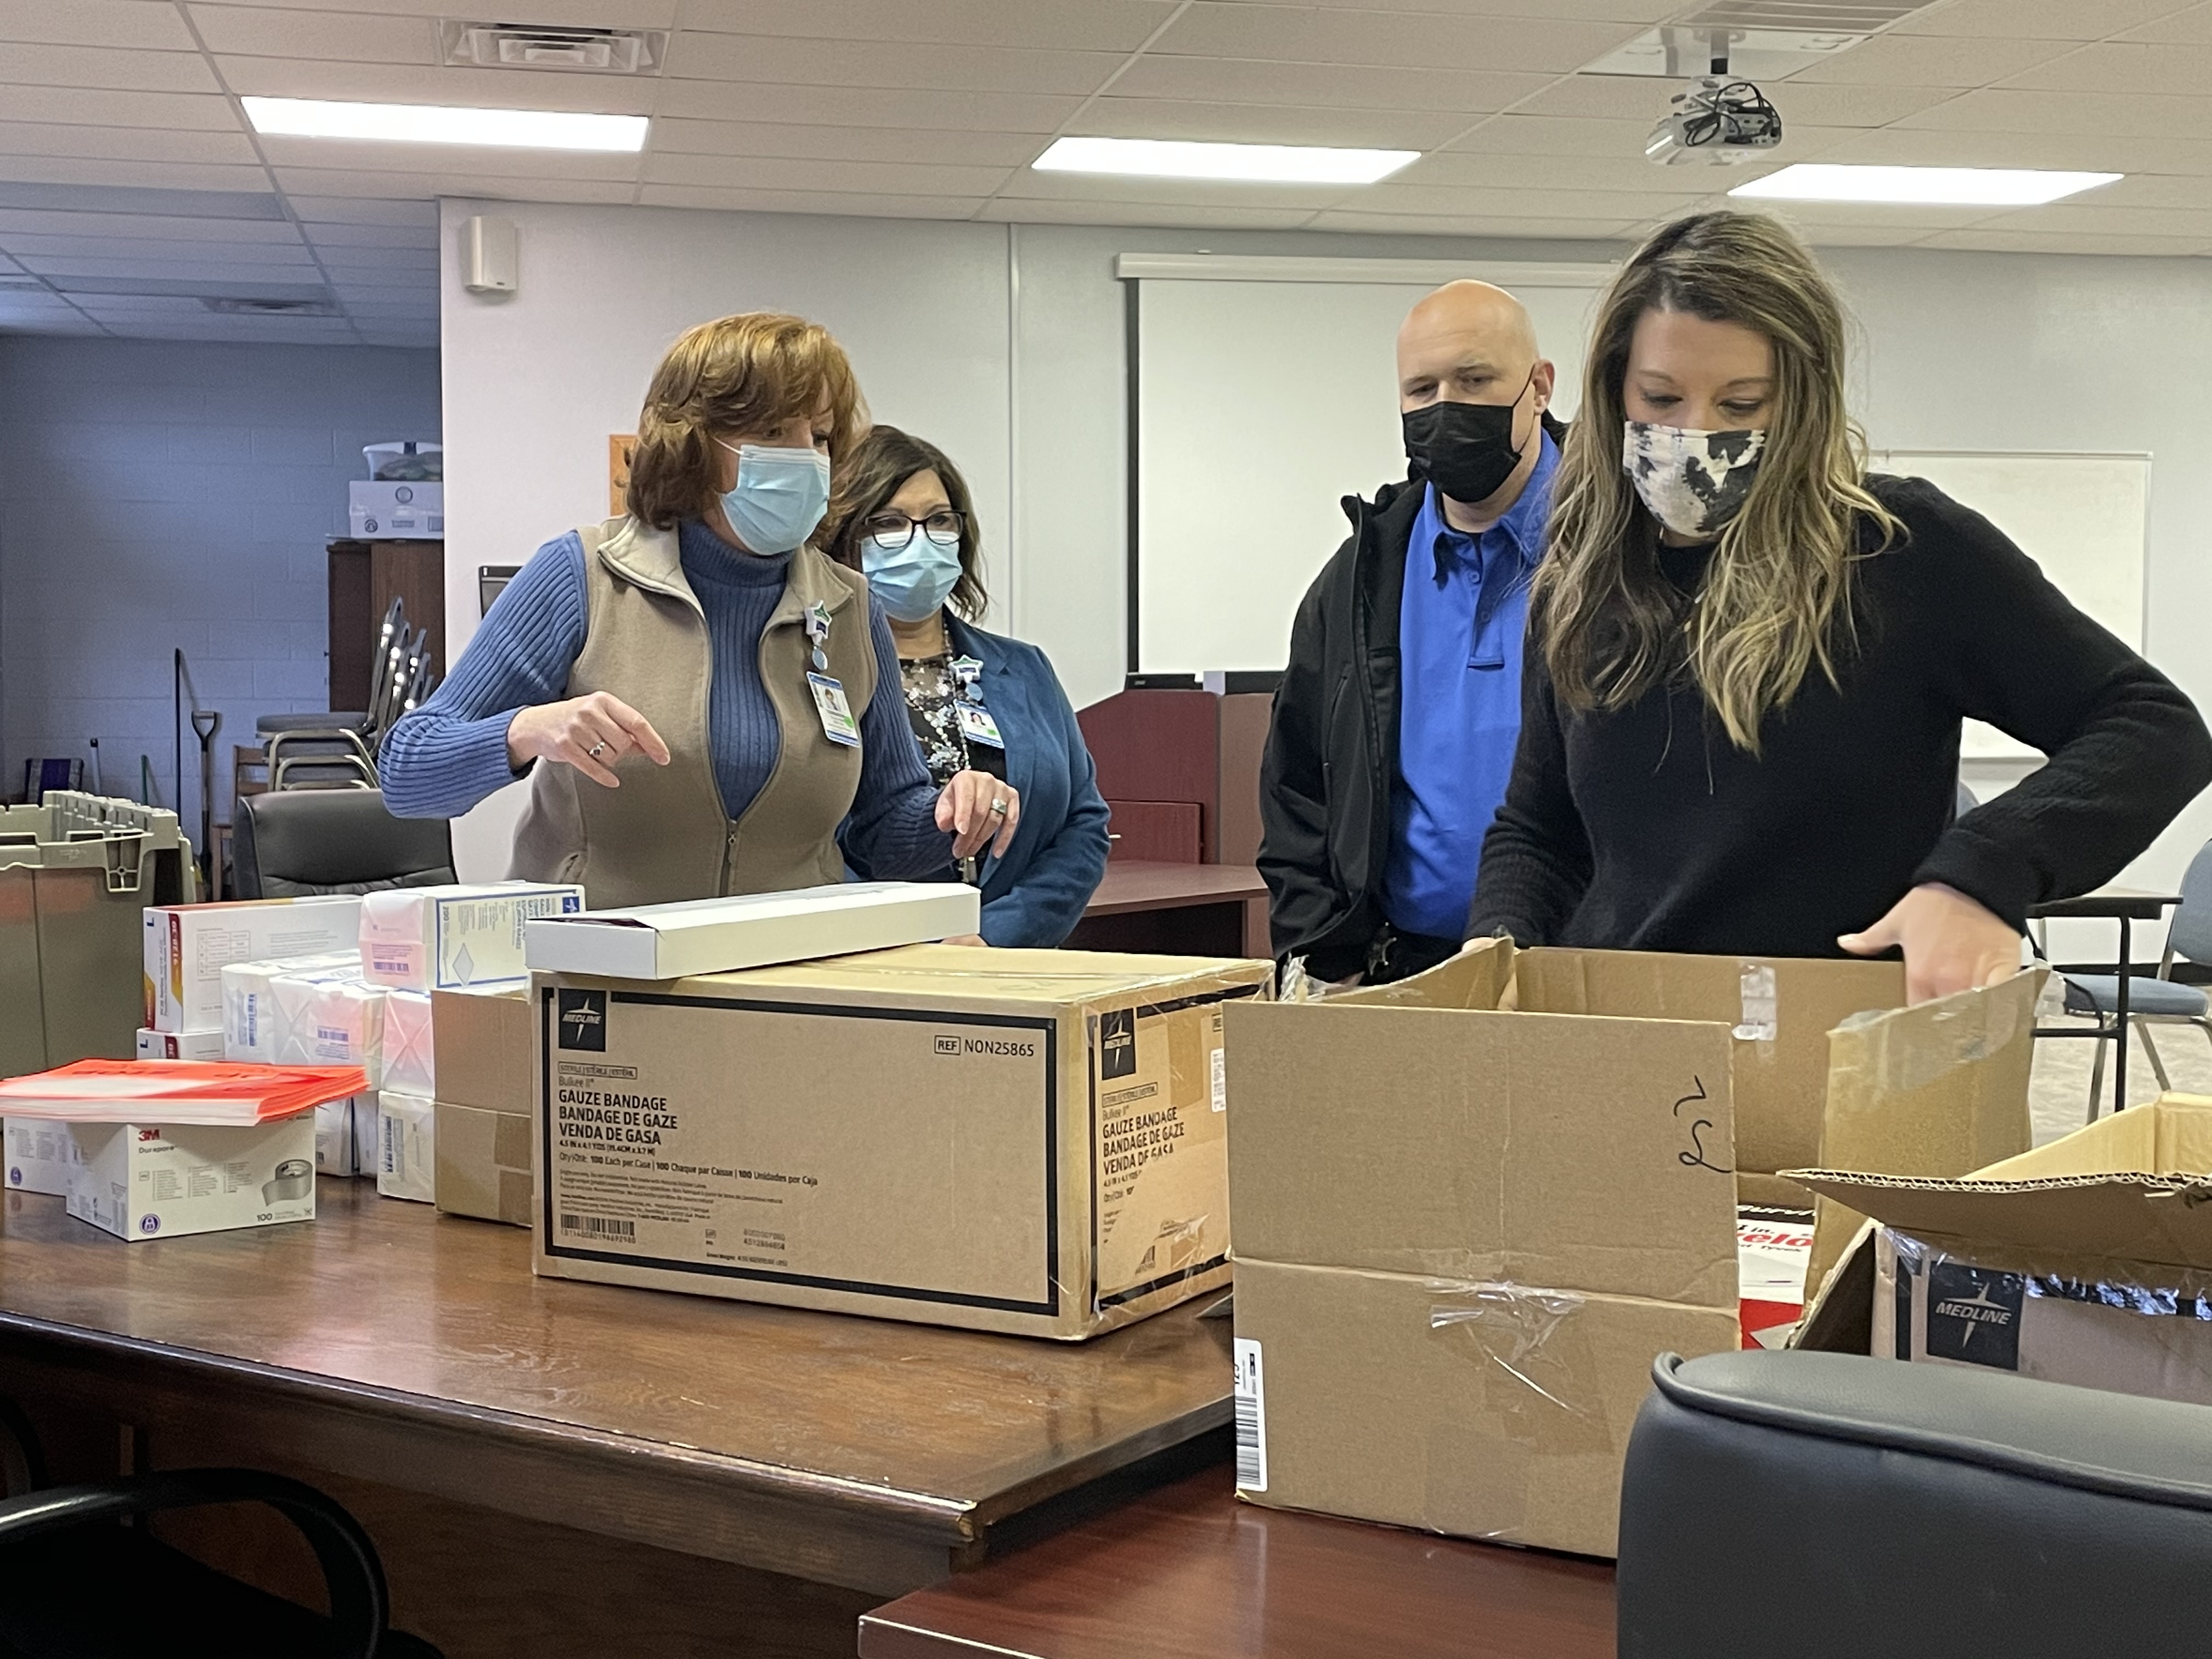 Neill, Hale and Vance look on as Mitchell County School Nurse Elizabeth Sparks unboxes and inspects some of the new Stop the Bleed kits. (MNJ Photo/Juliana Walker)